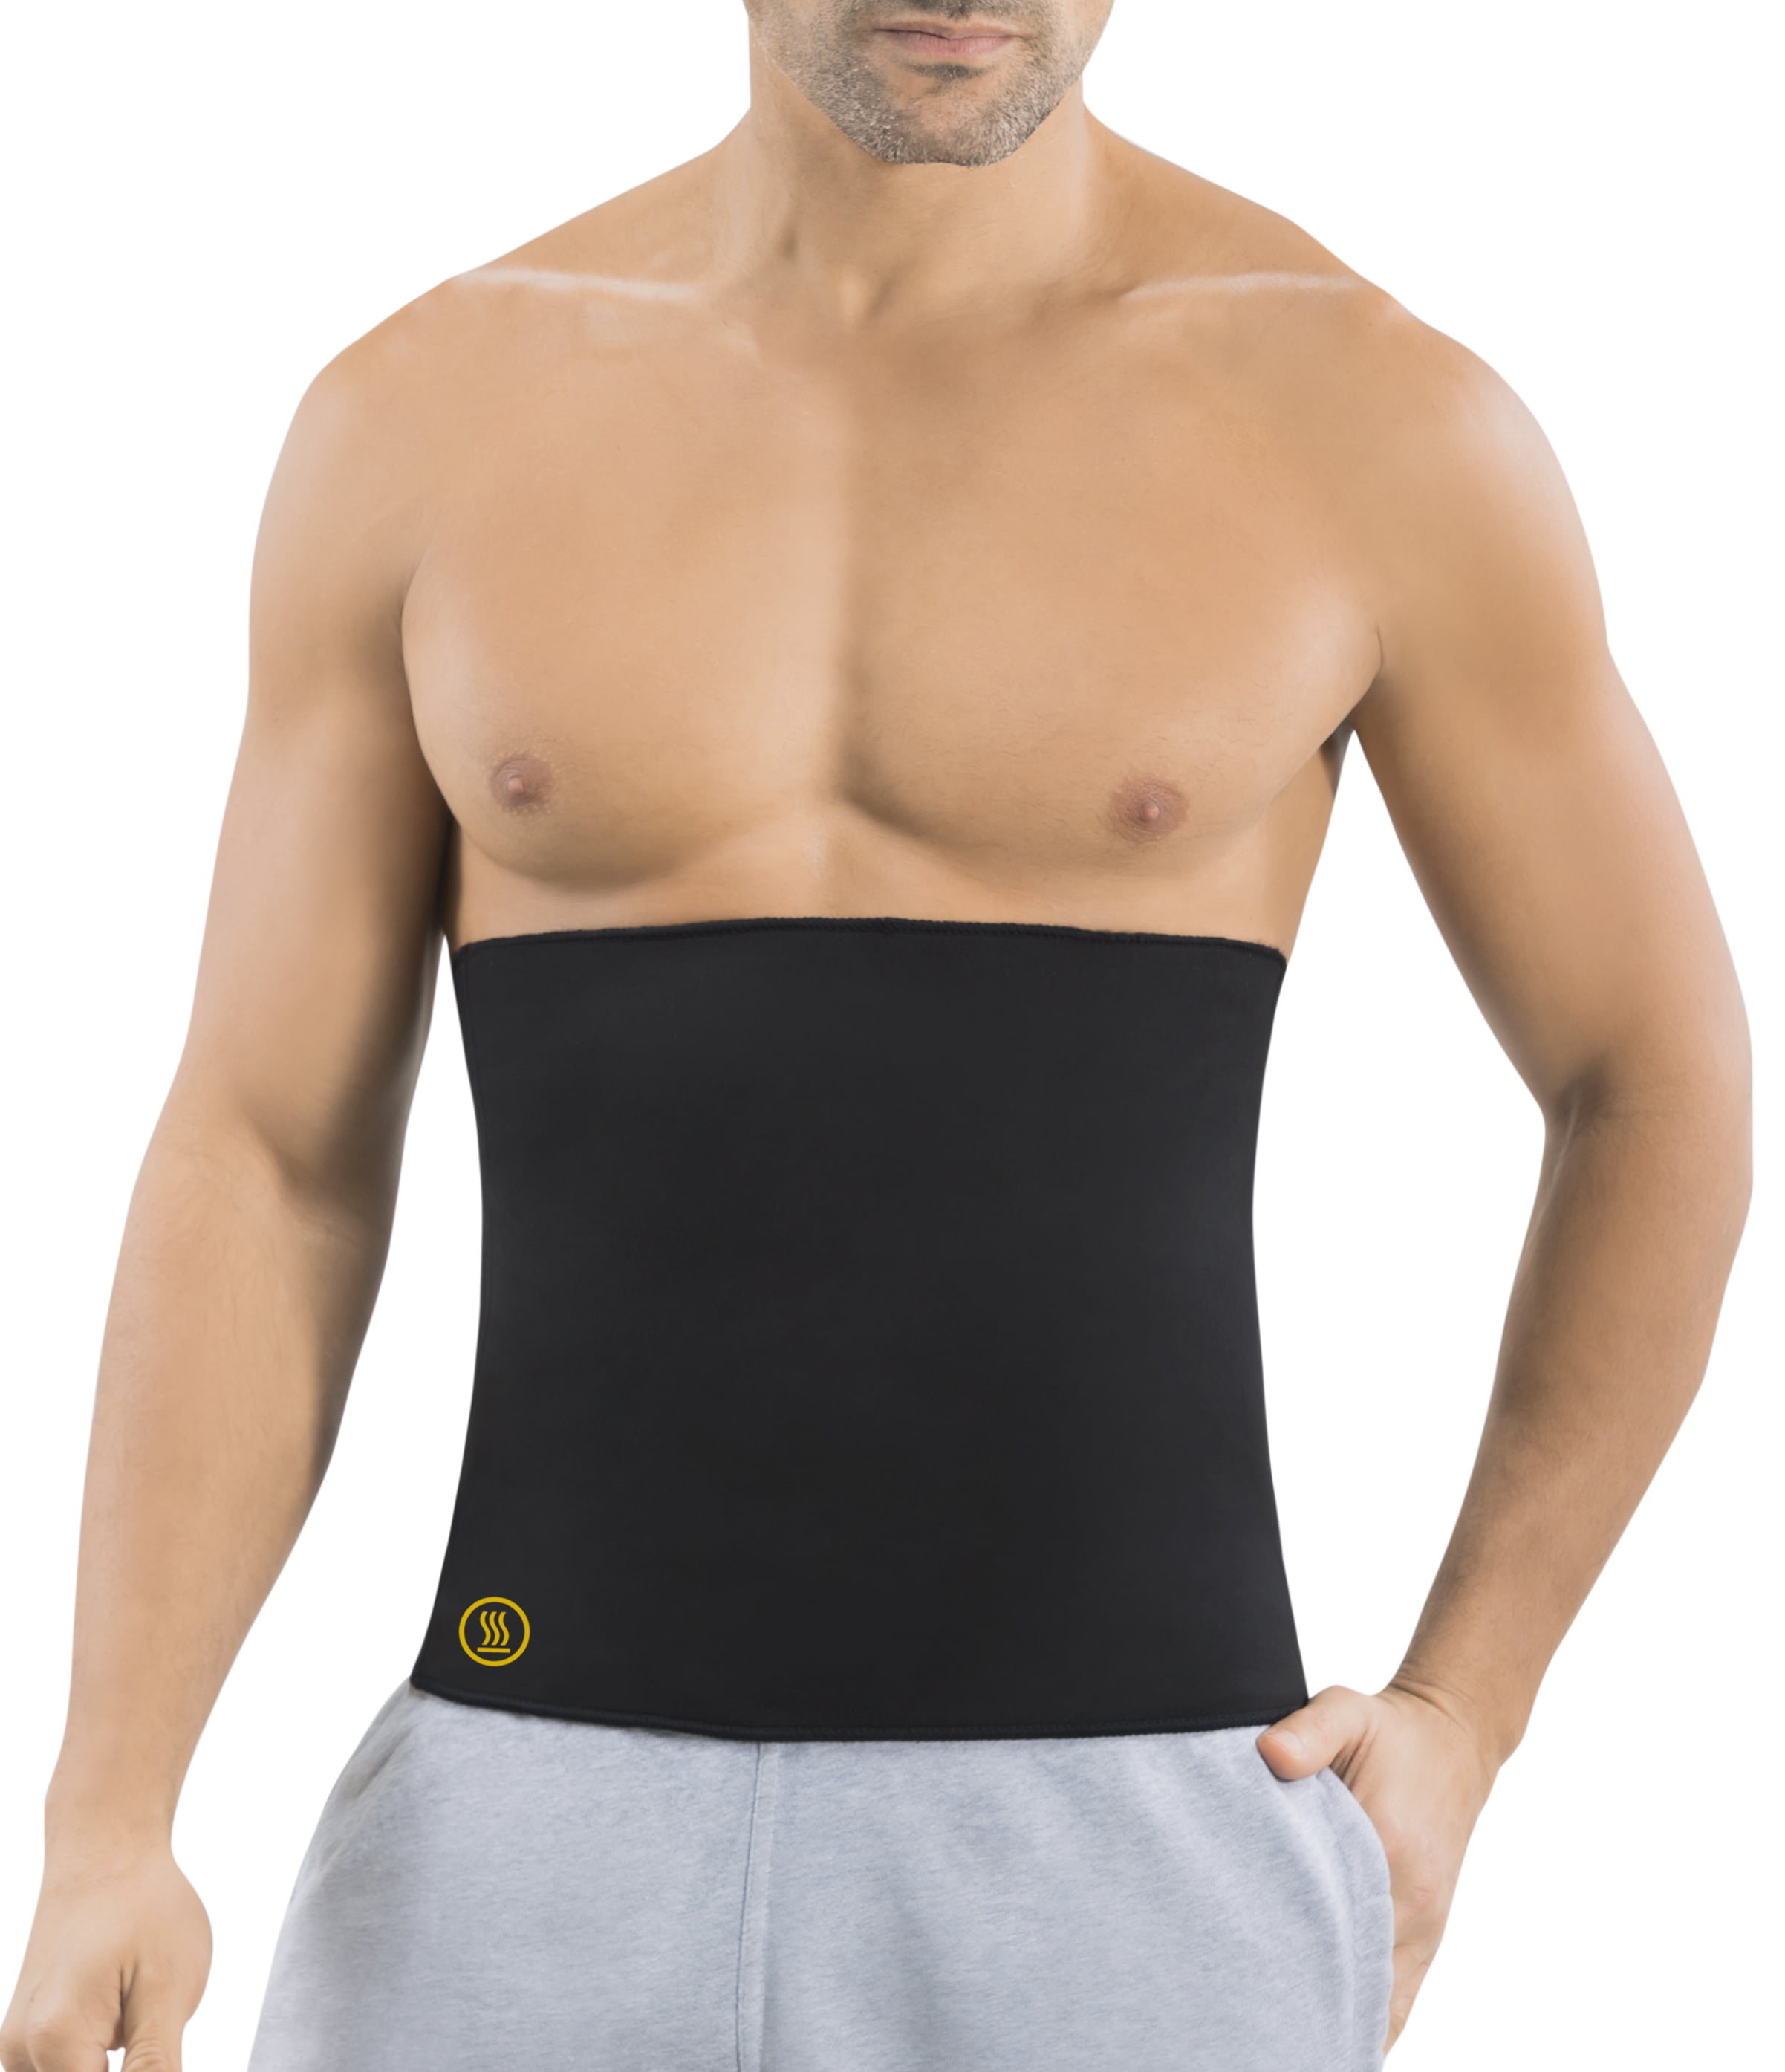 Hot Shapers Thermal Hot Belt for Men - Slimming Compression and Calorie  Burning Activewear 